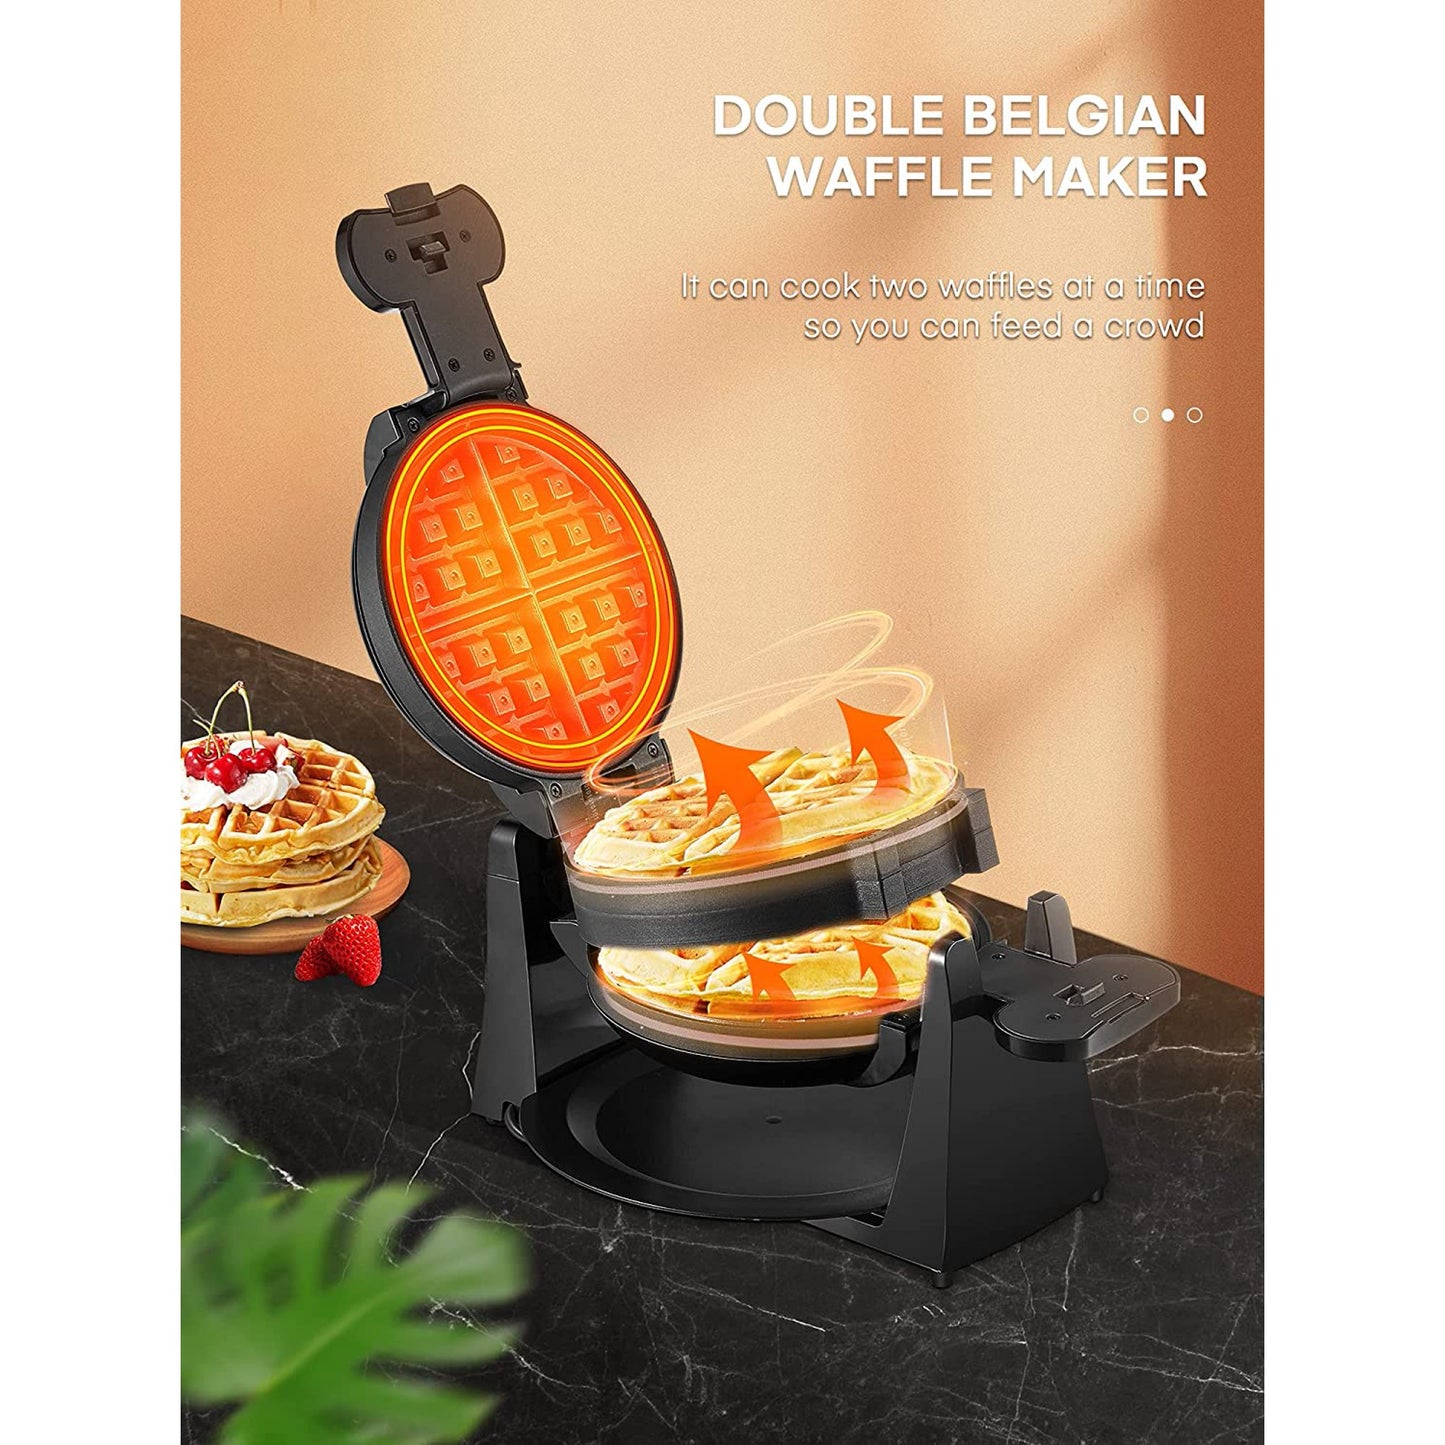 180° Flip Belgian Double Waffle Maker, Waffle Iron 8-Slice One Time, Nonstick Plates, Removable Drip Tray & Rotating, 1400W Adjustable Temperature Control & Cool Touch Handle, Black